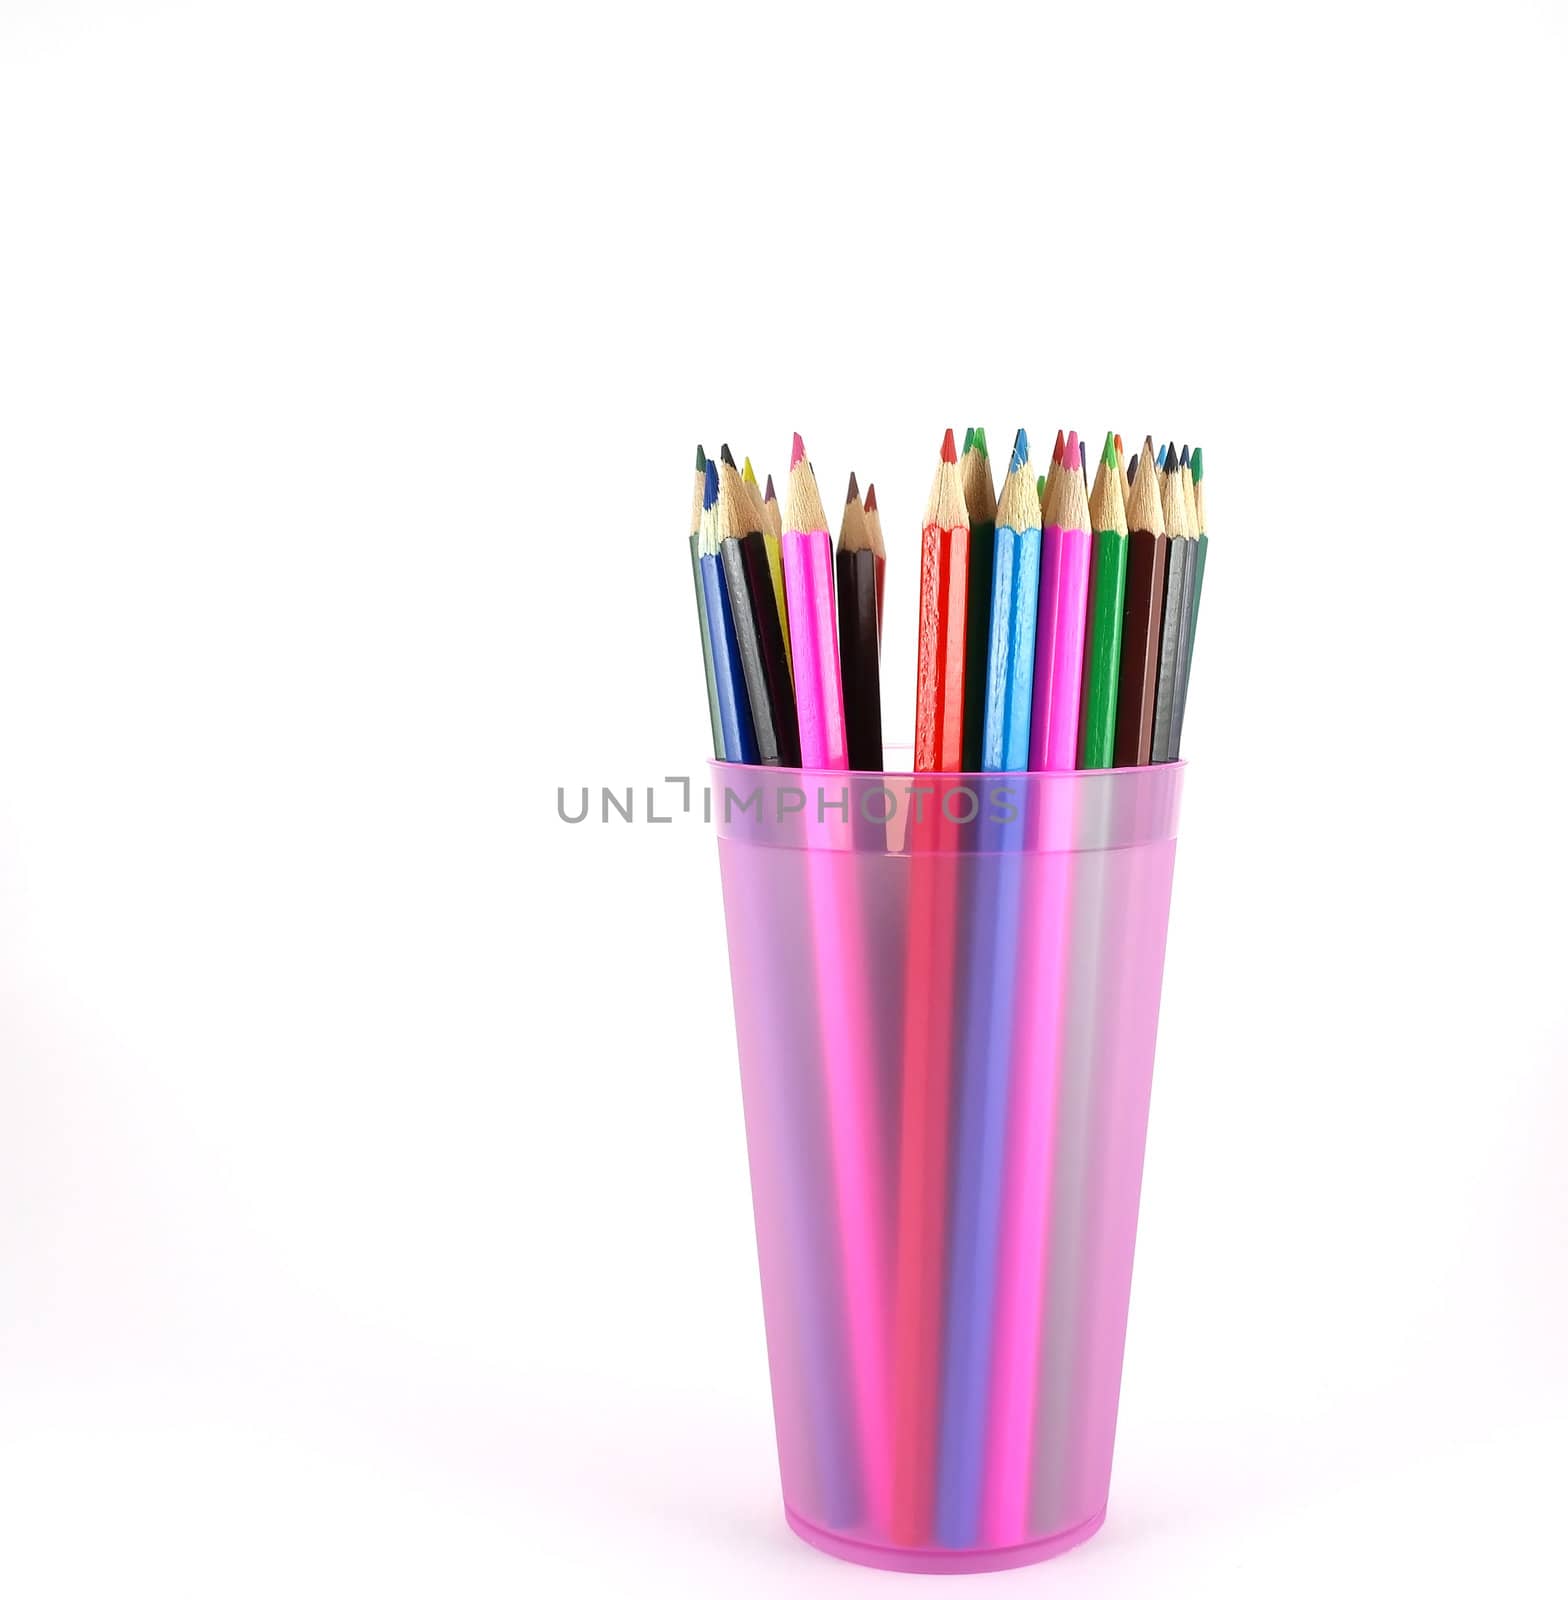 Color pencils in the pink prop over white by sergpet